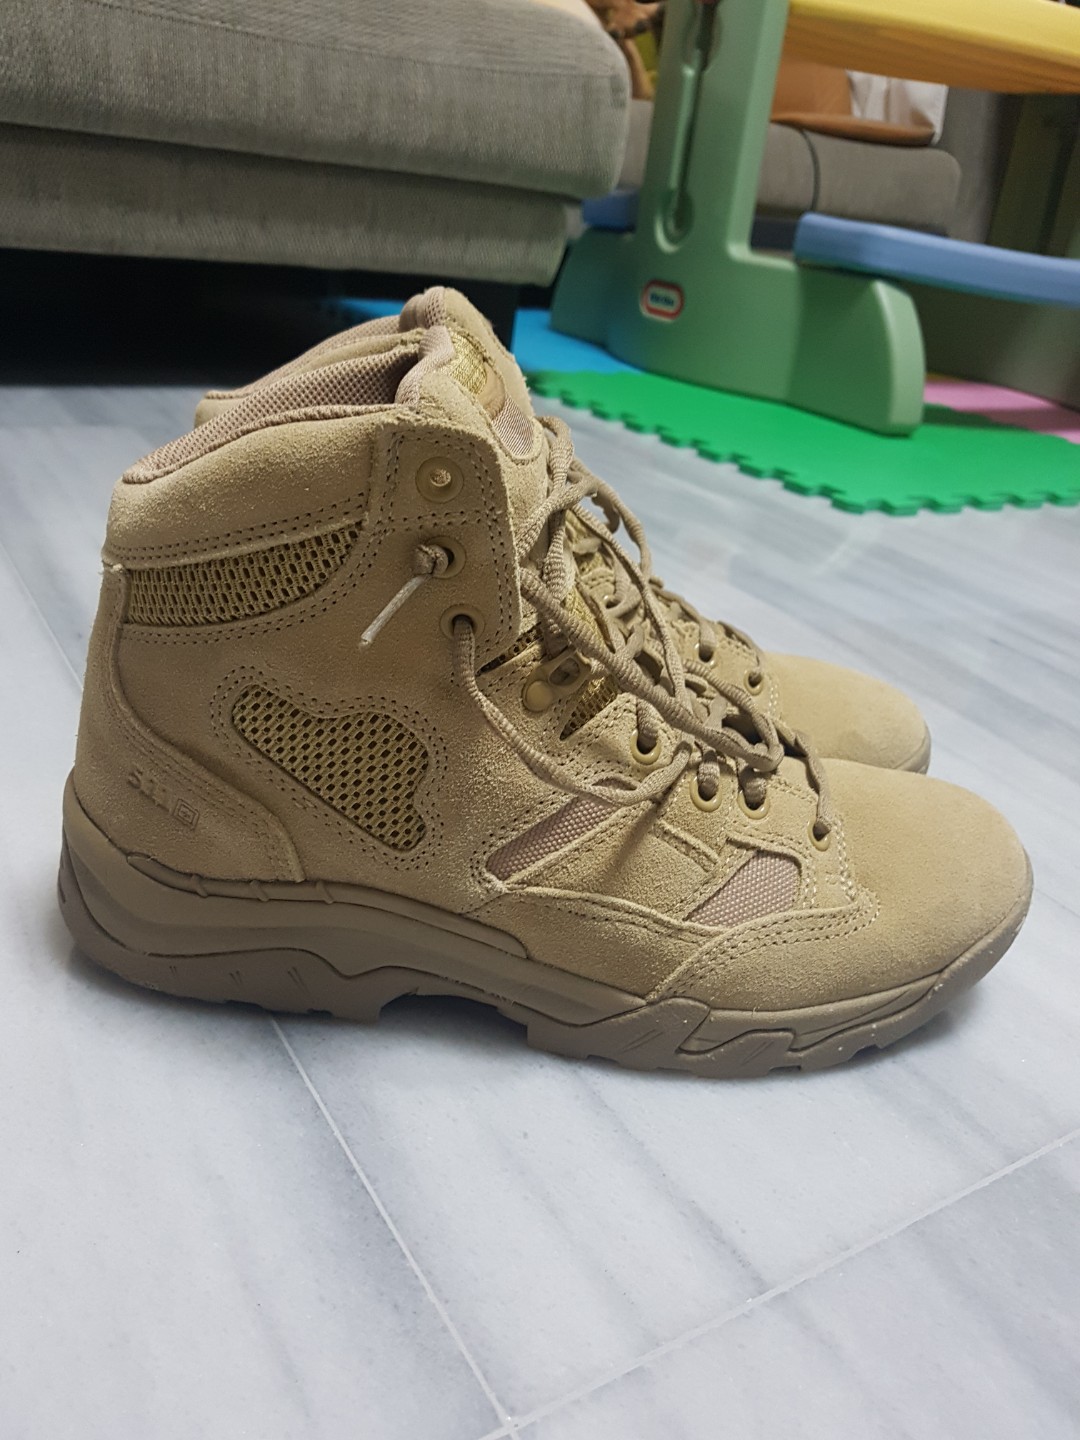 511 coyote boots